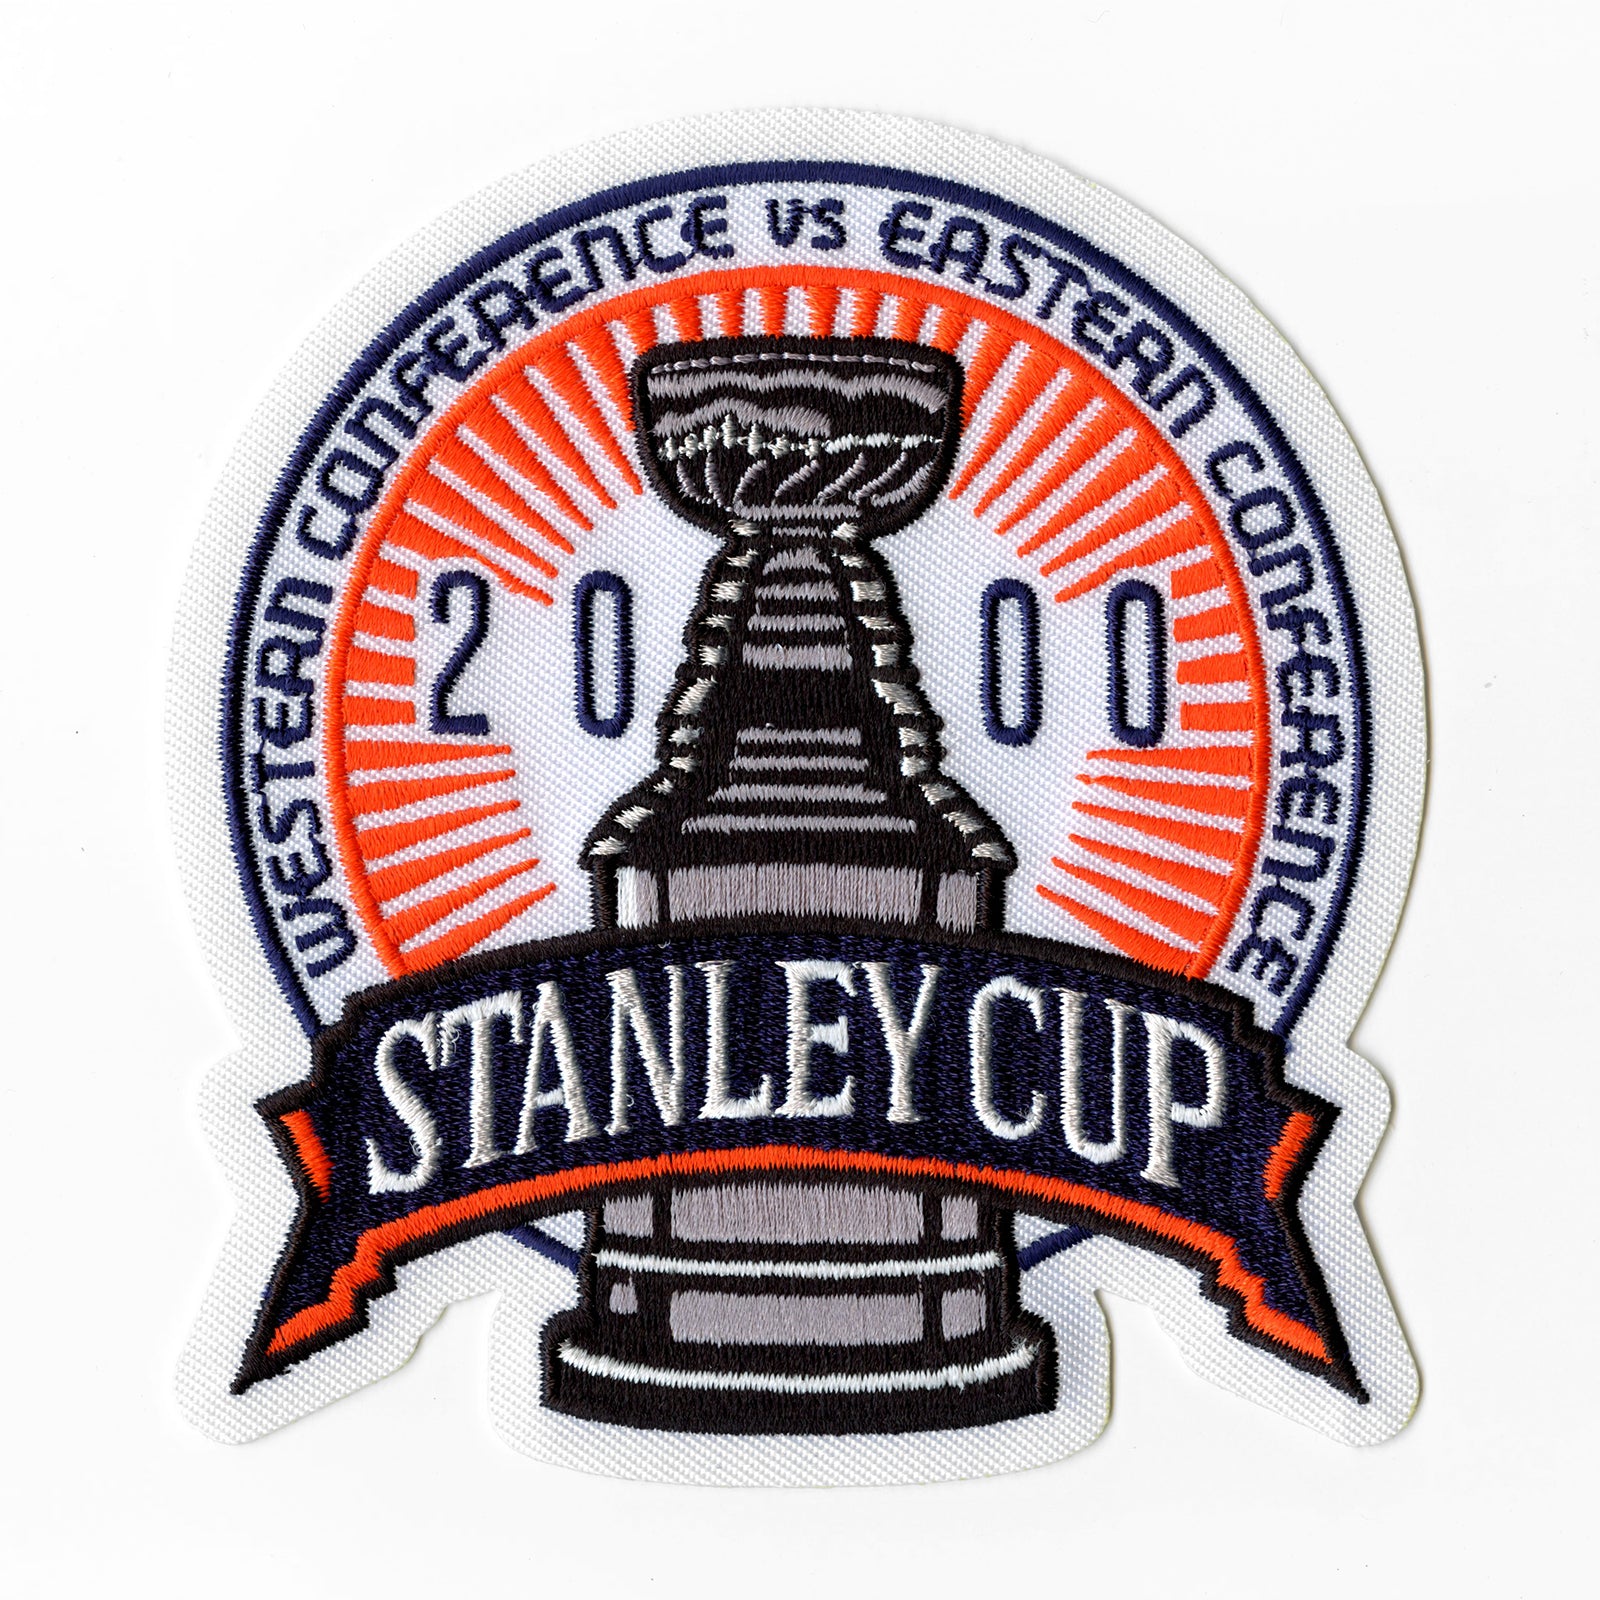 Jersey ads are messing with Stanley Cup patch and fans aren't happy